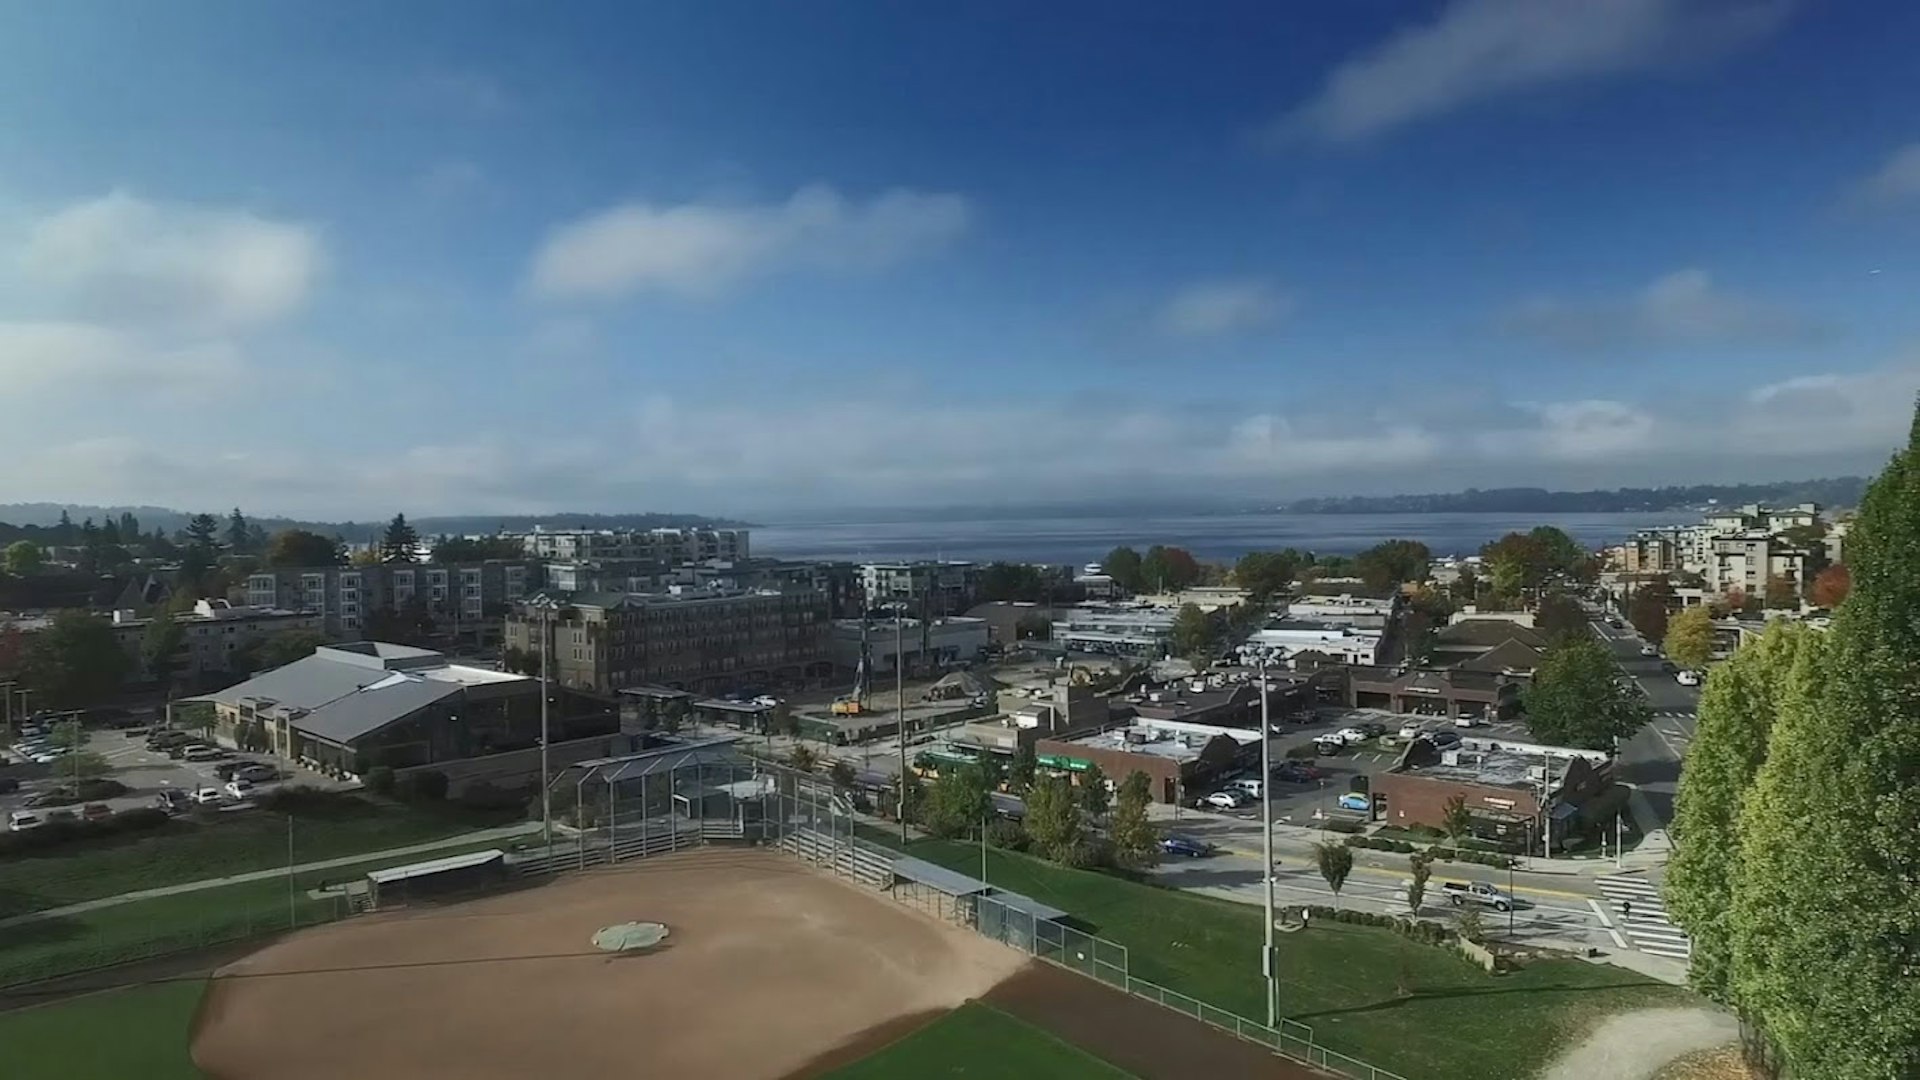 This shot overlooks the clean brown baseball diamond at Lee Johnson Field in Kirkland from a high enough angle to afford a view of the surrounding low brick buildings and beyond them, the blue water of Lake Washington's Moss Bay